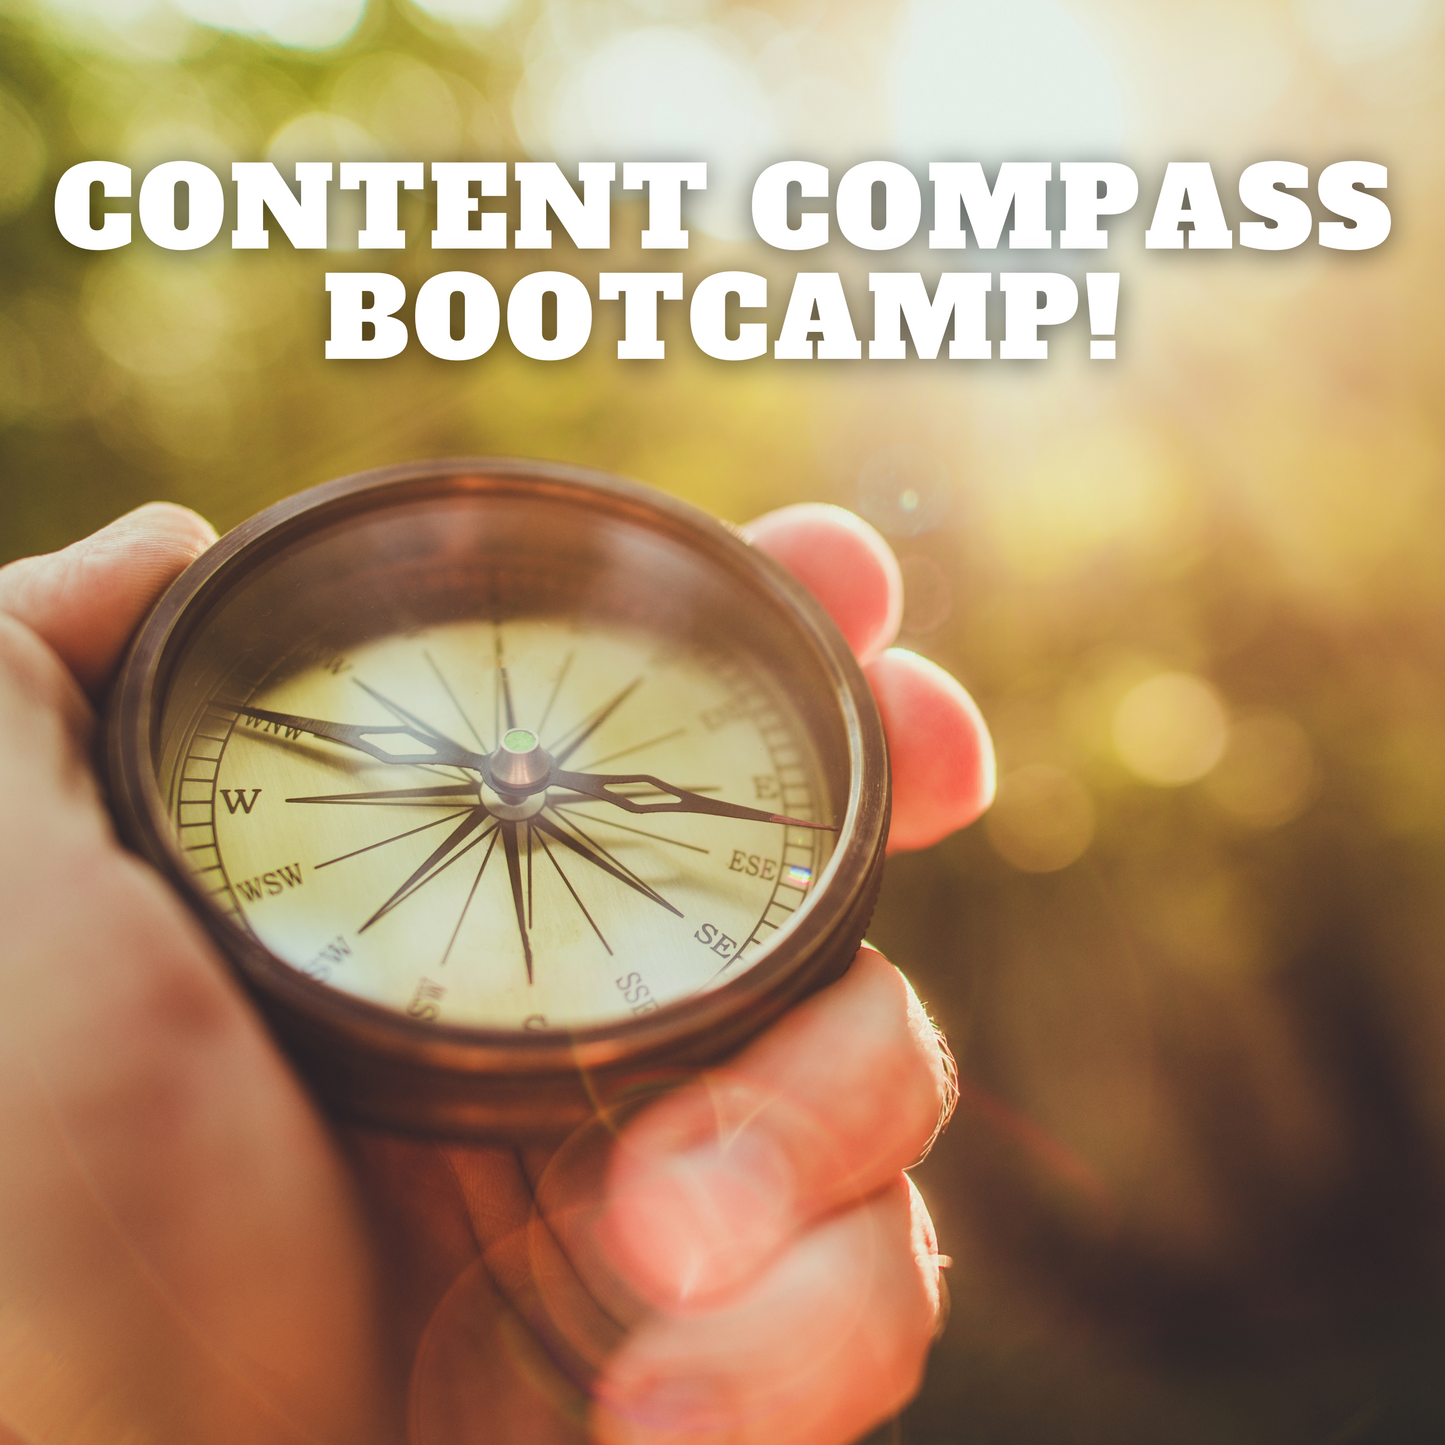 Content Compass Bootcamp: A Social Media Bootcamp for Small Business Owners!